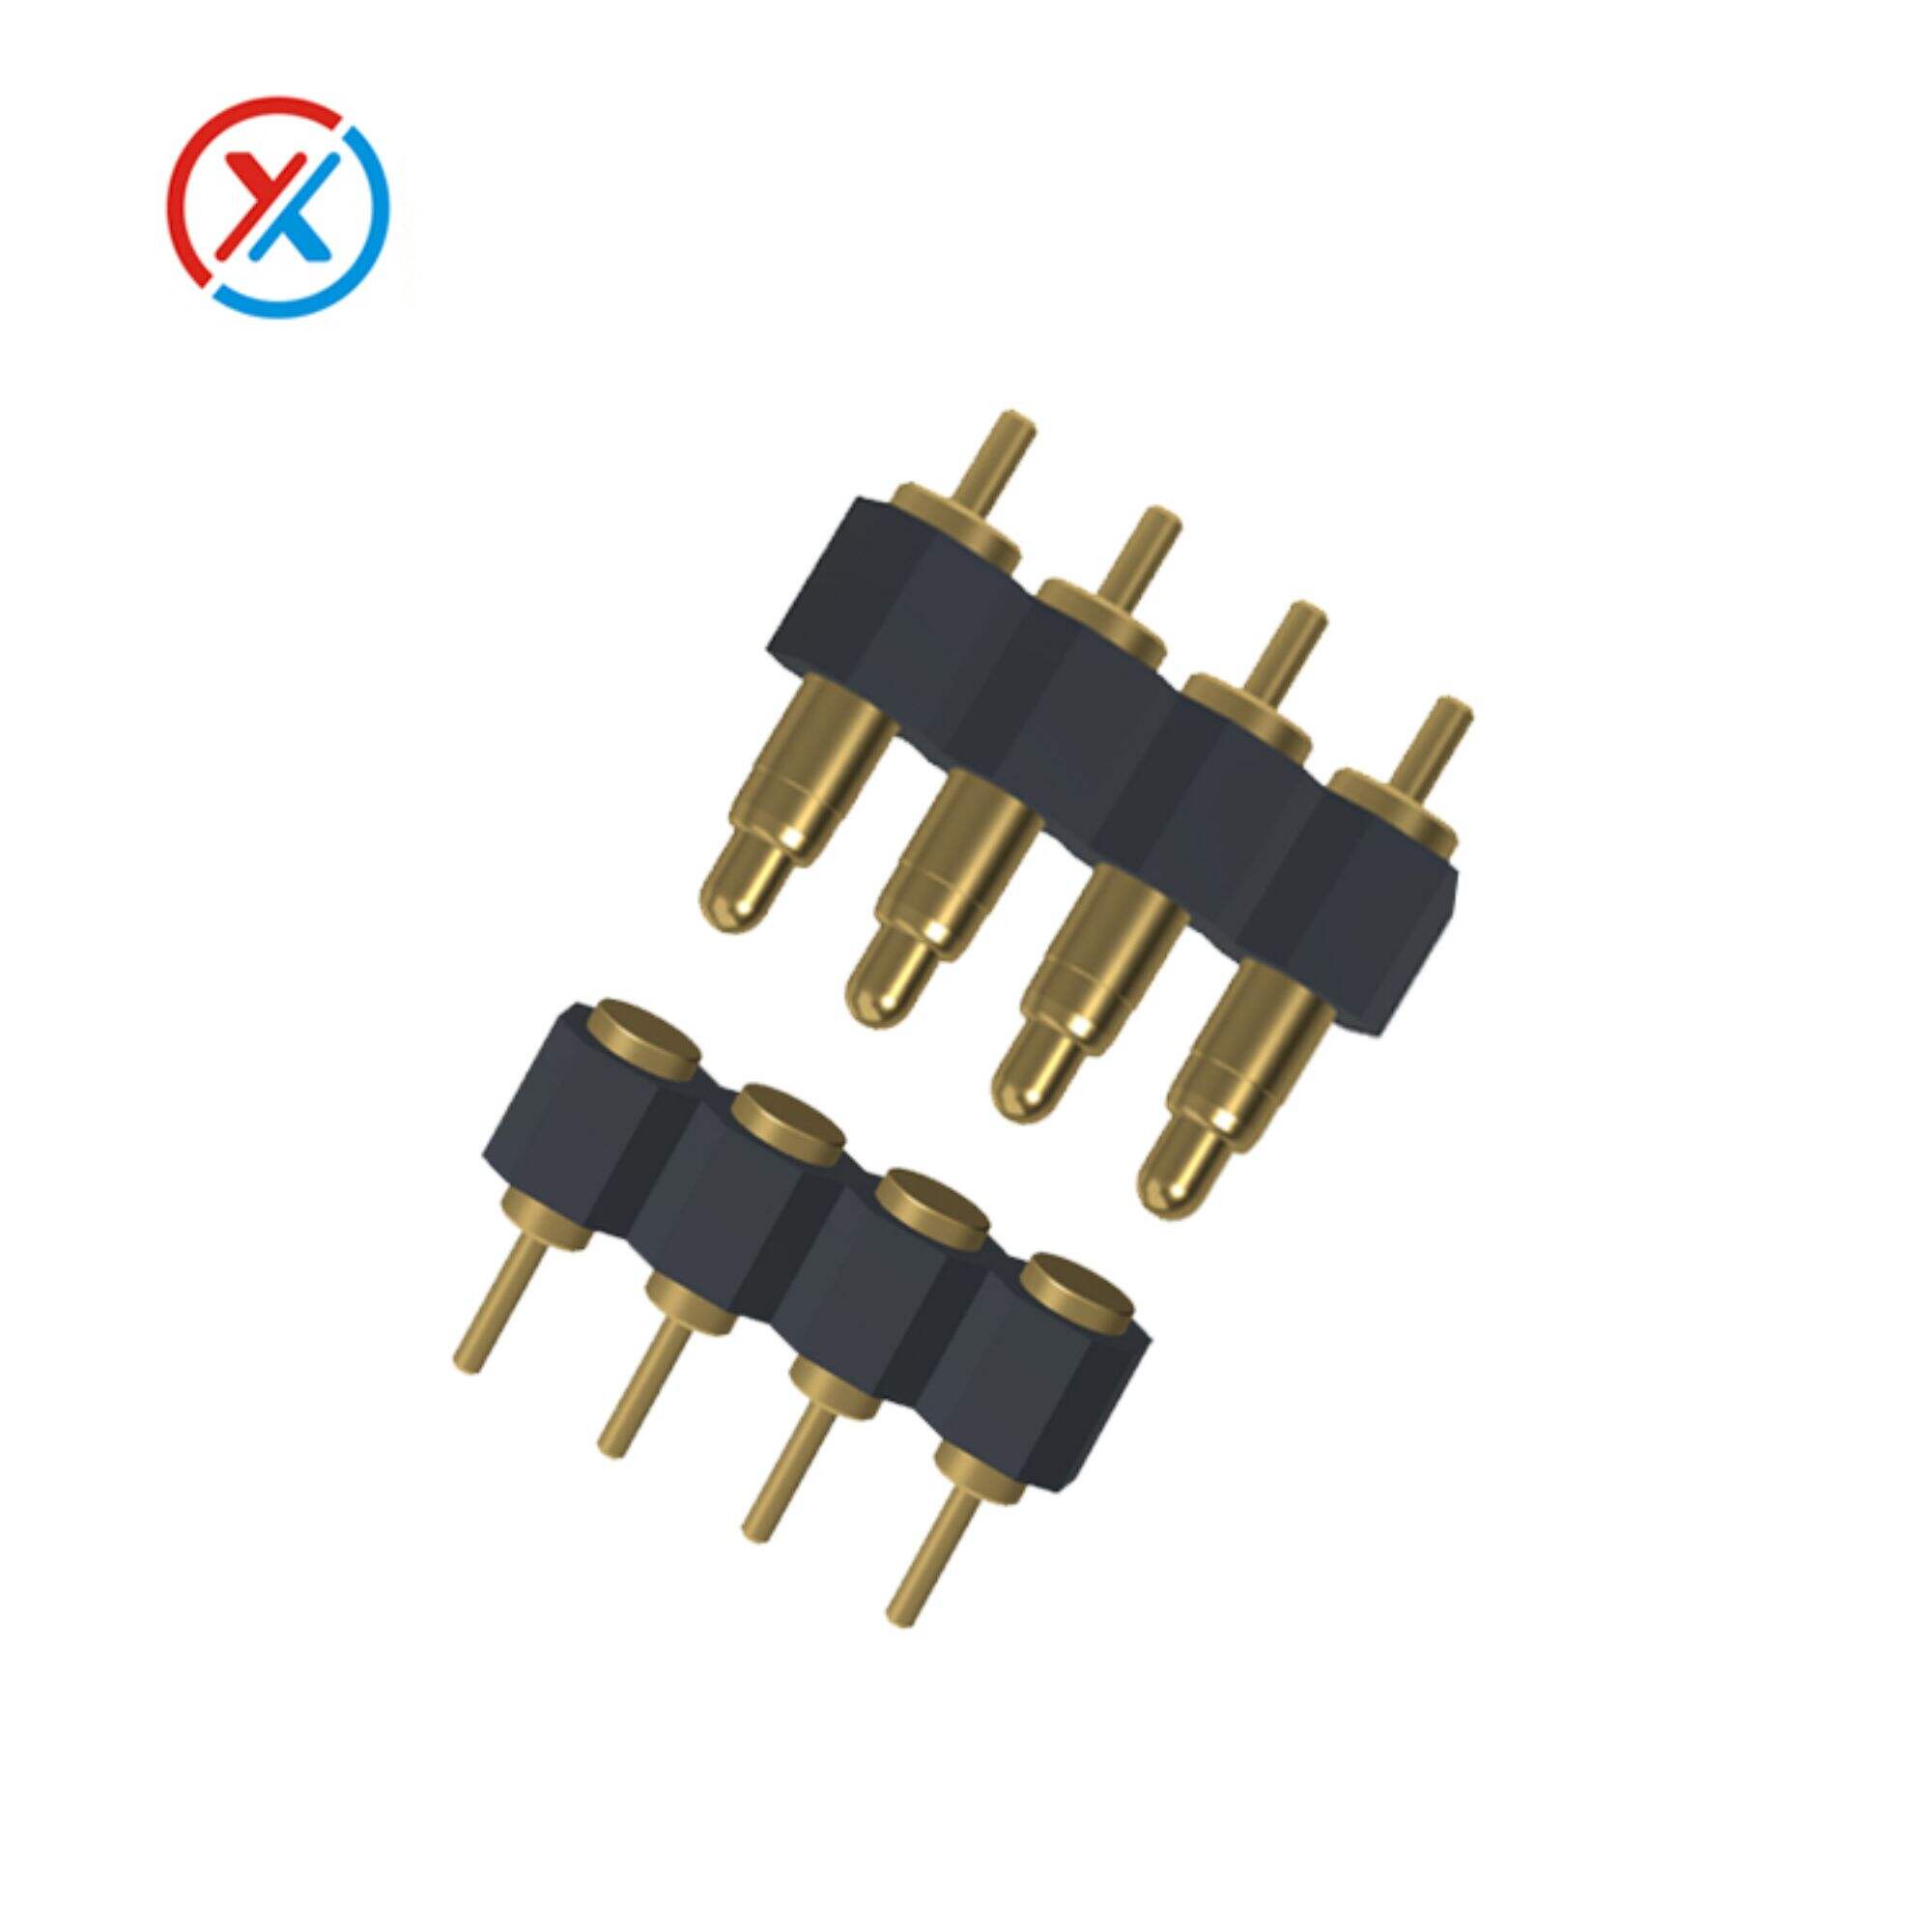 6pin waterproof pogo pin connector 3A current magnetic electrical connectors-6PIN